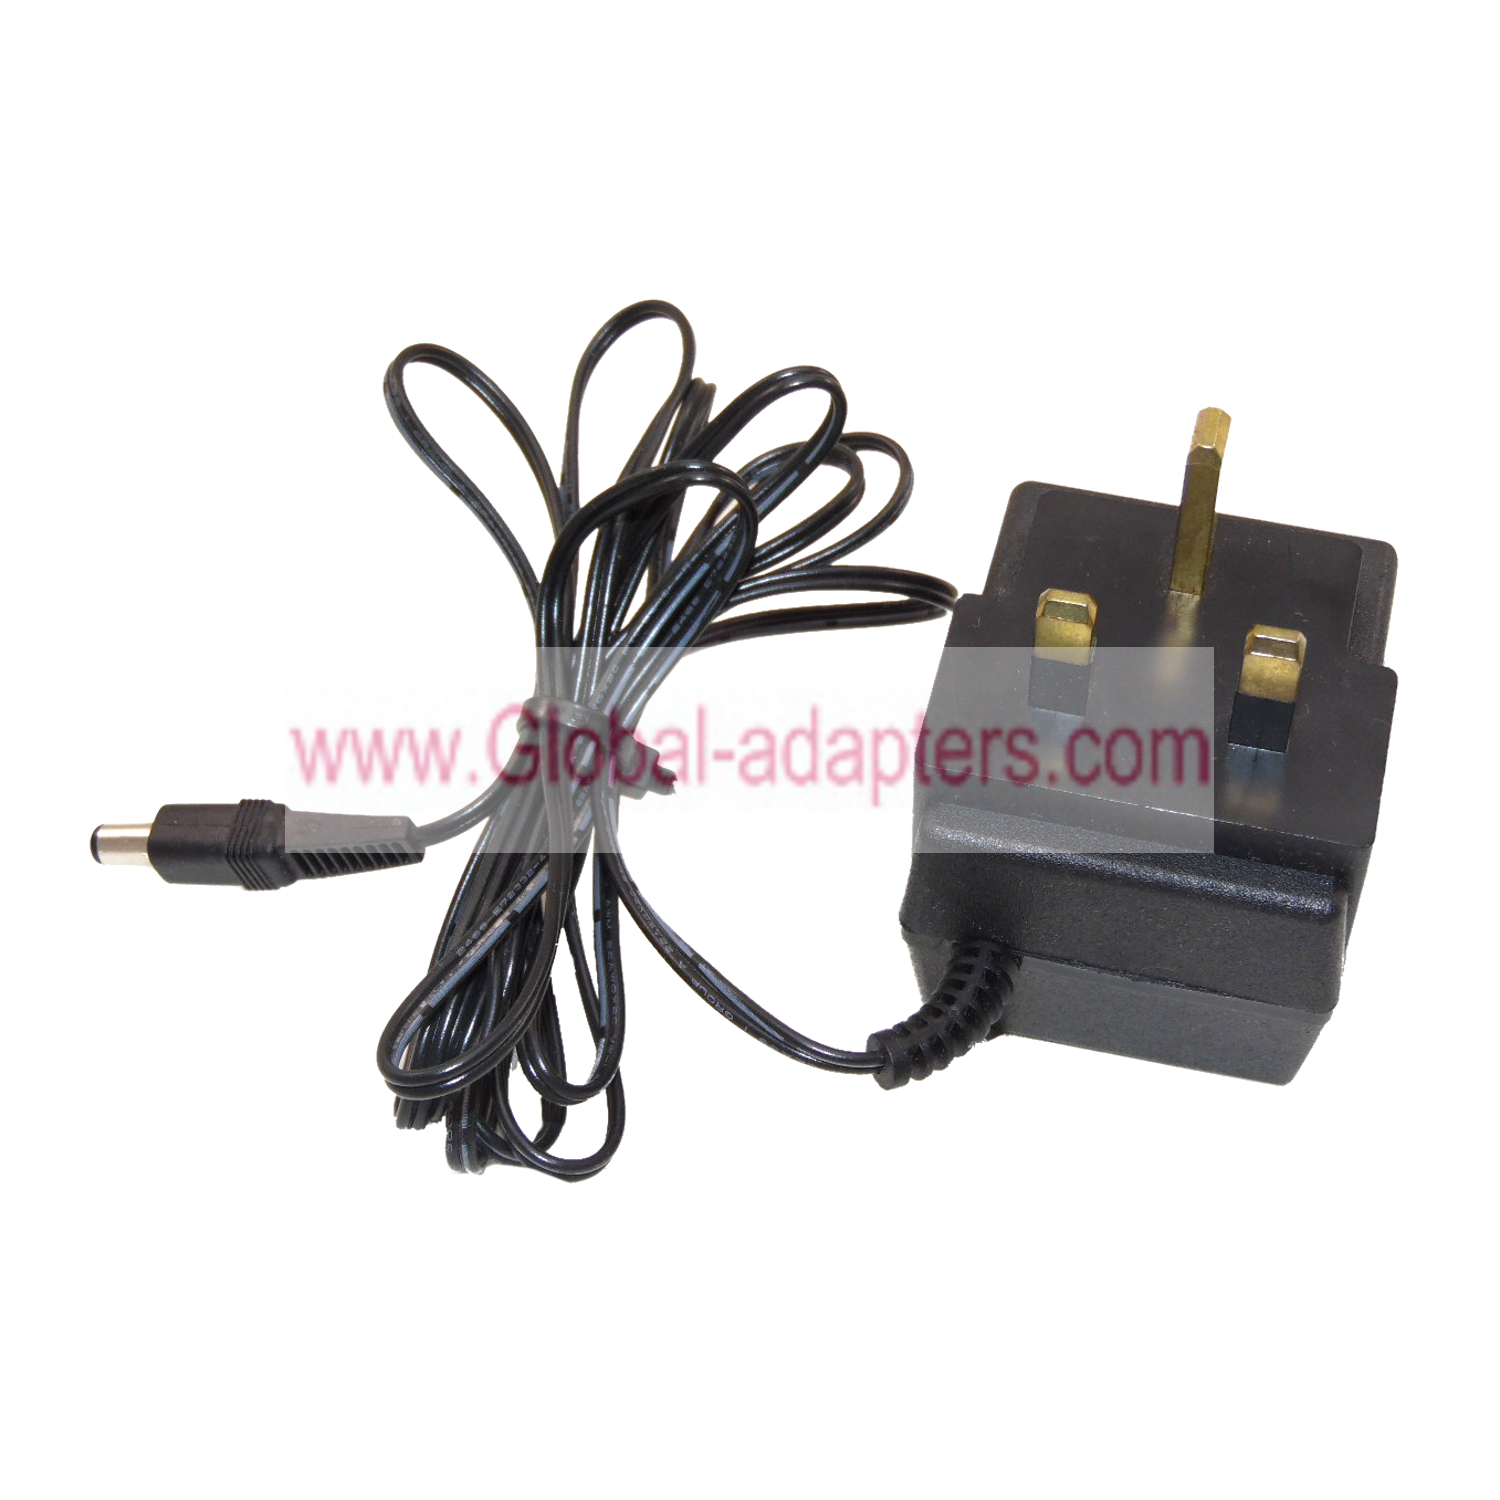 NEW AD-0750D 7.5VDC 500mA Power AC Adapter